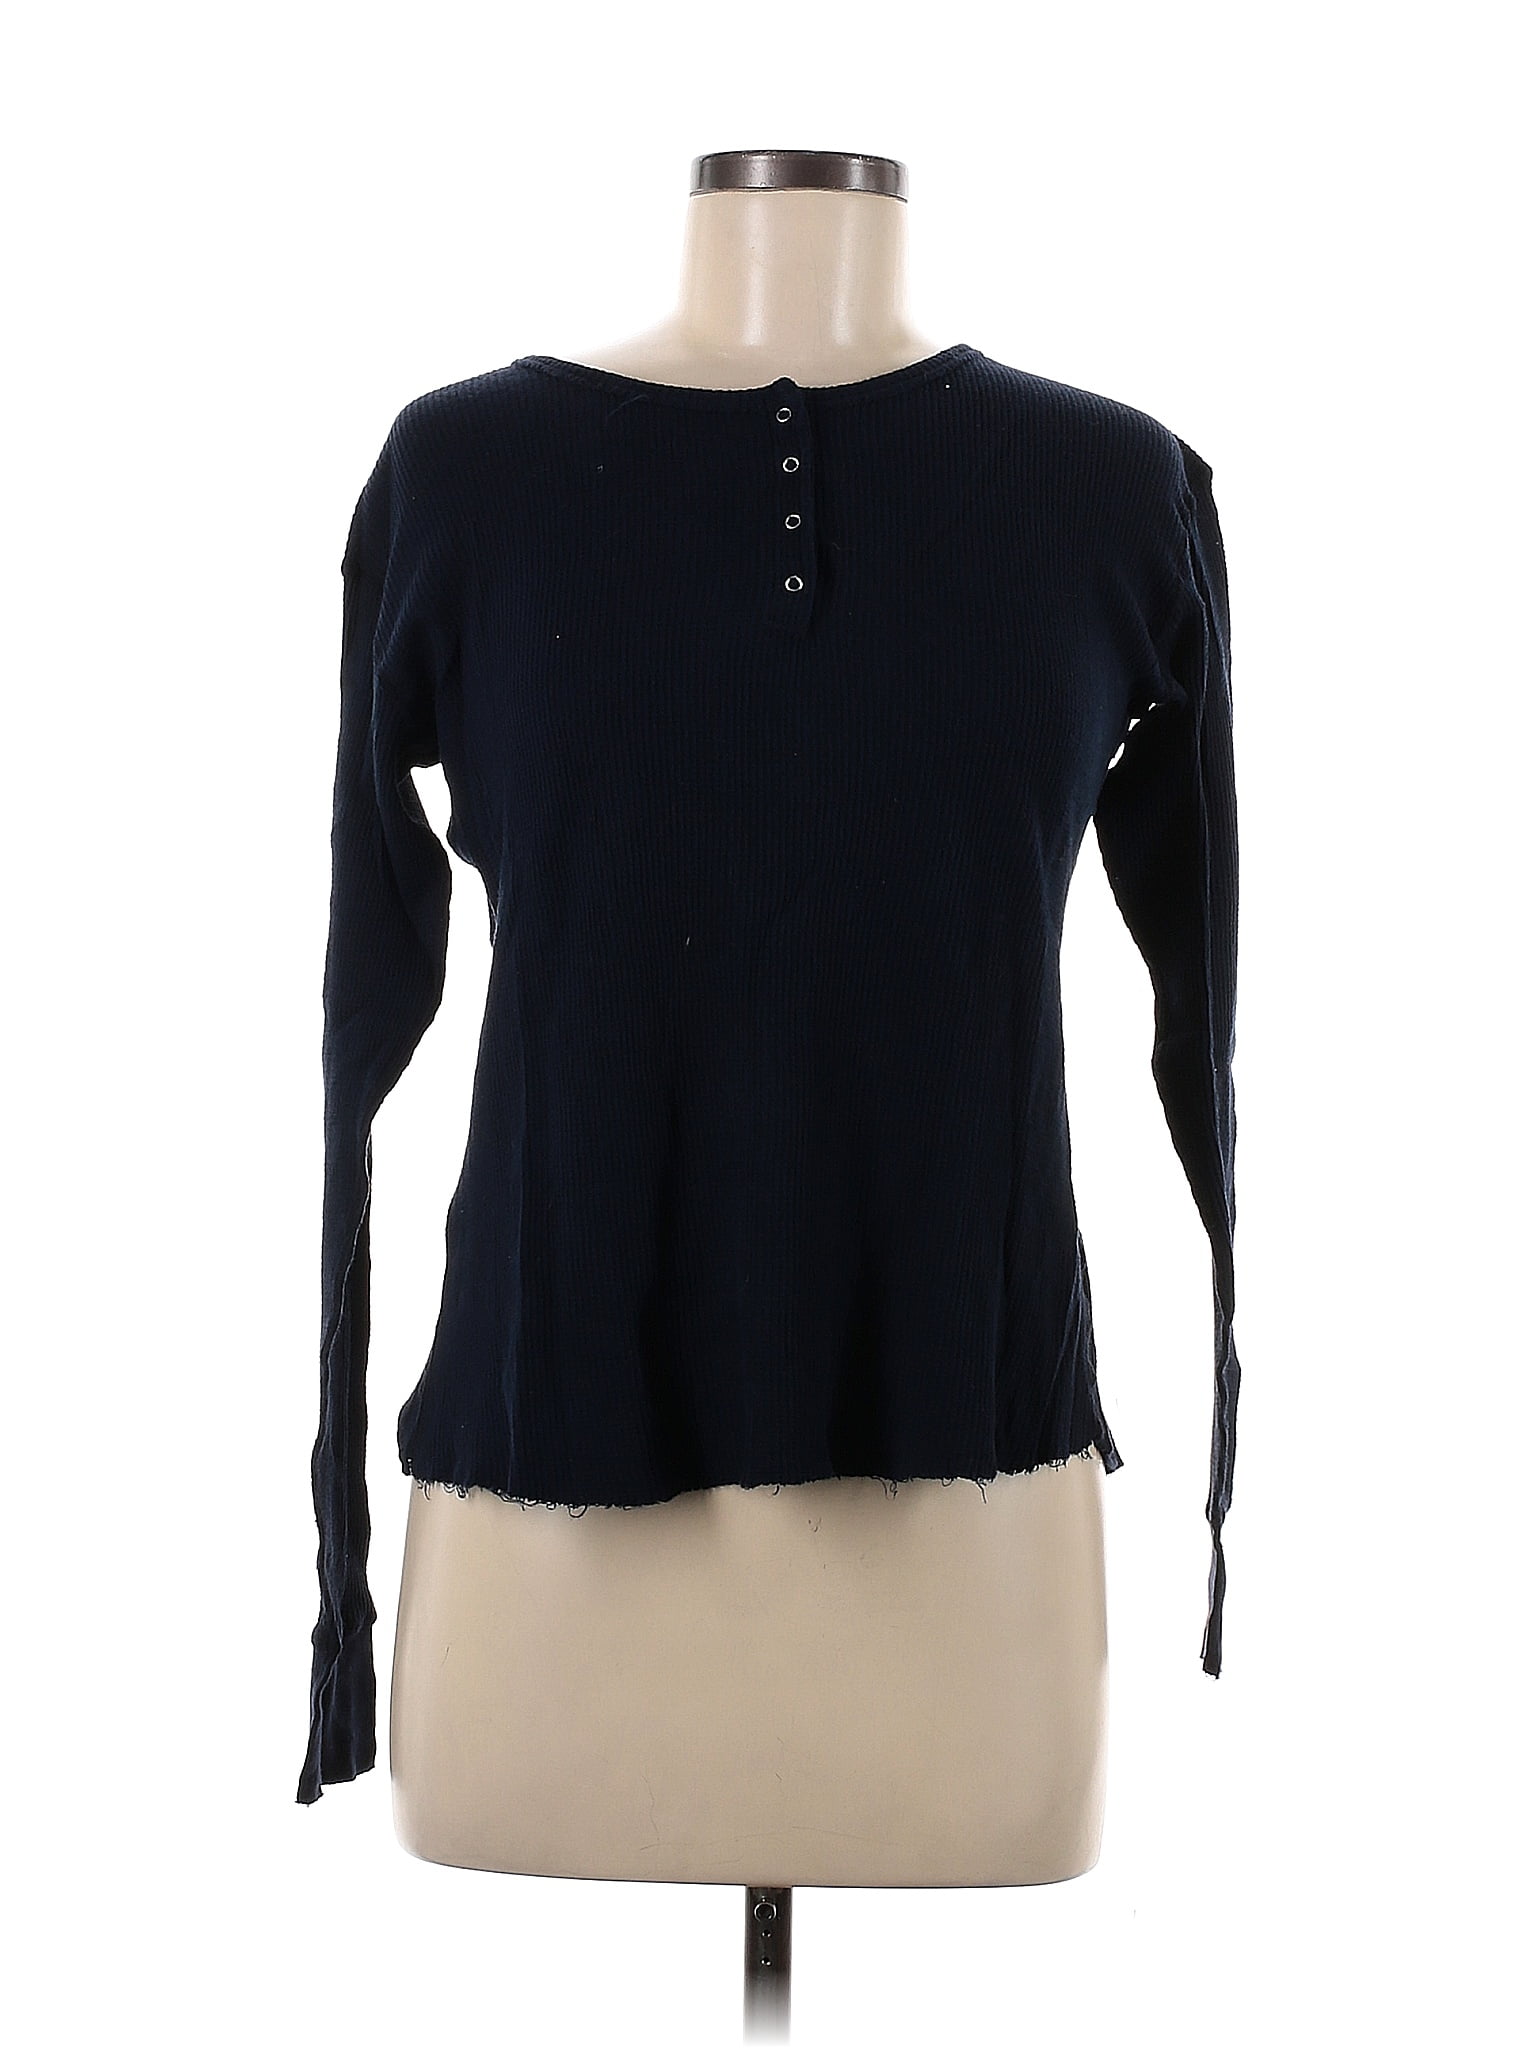 Brandy Melville 100% Cotton Solid Navy Blue Long Sleeve Henley One